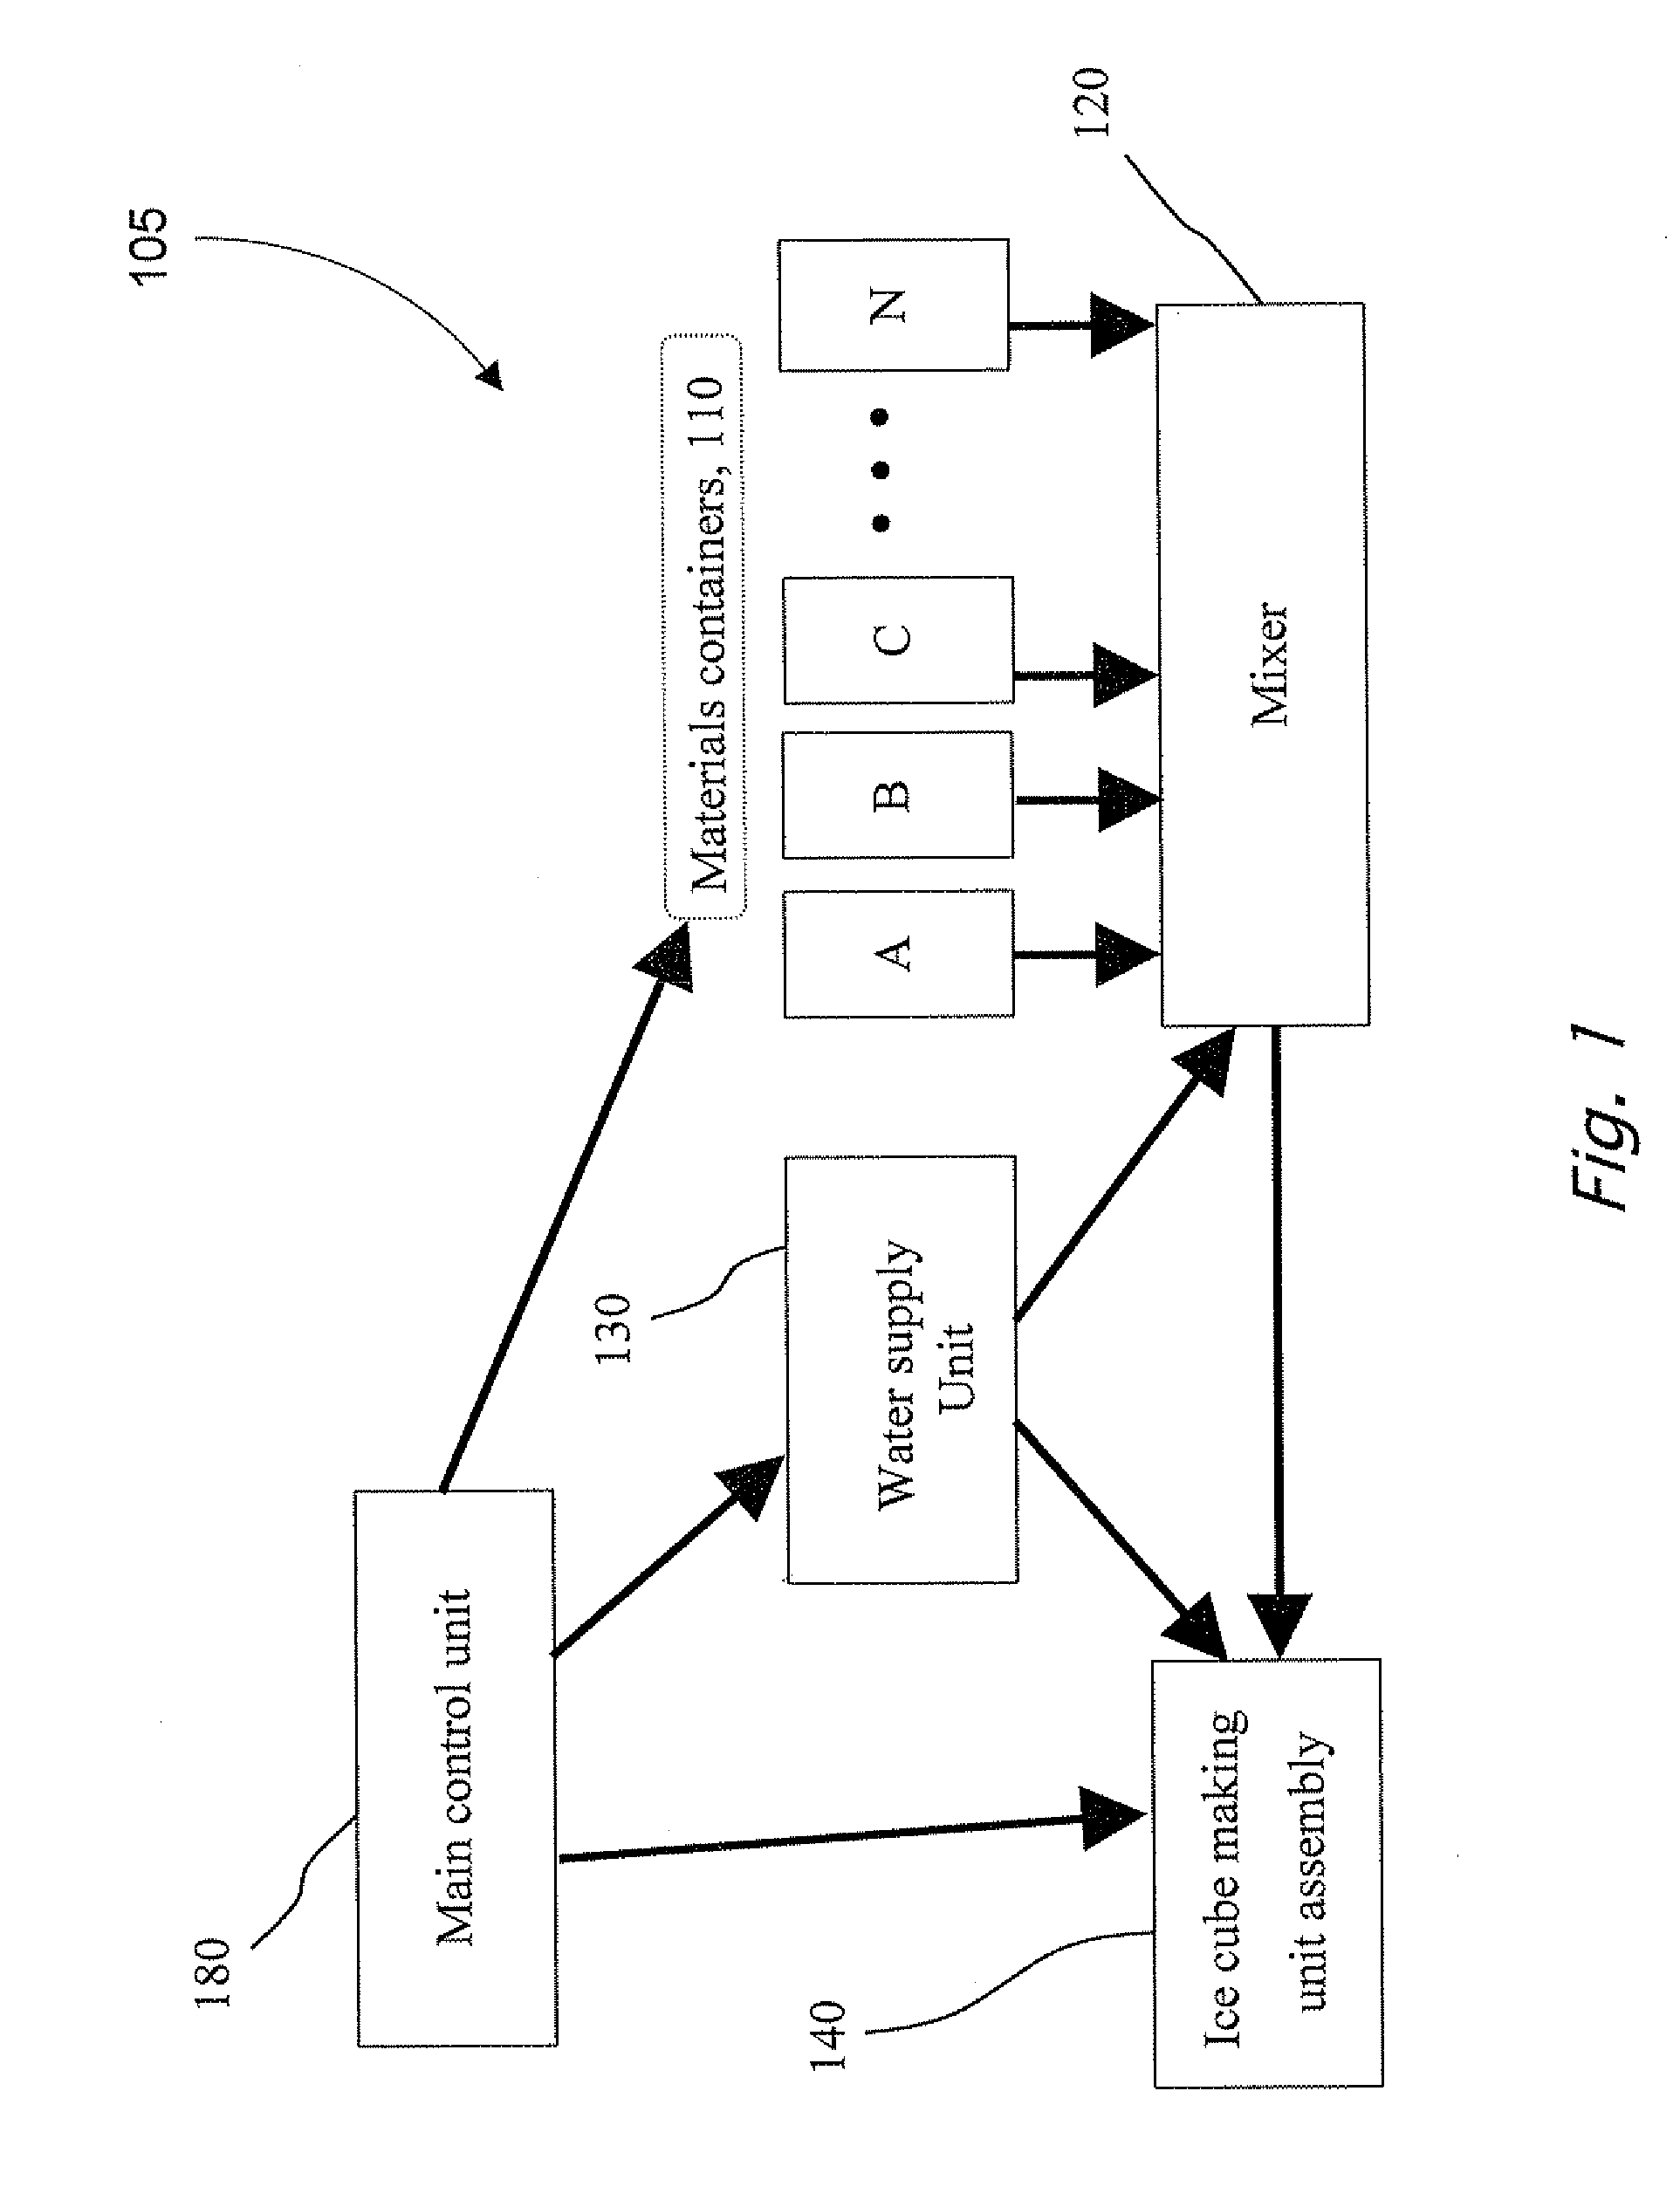 Devices and methods for producing controlled flavored ice drinks